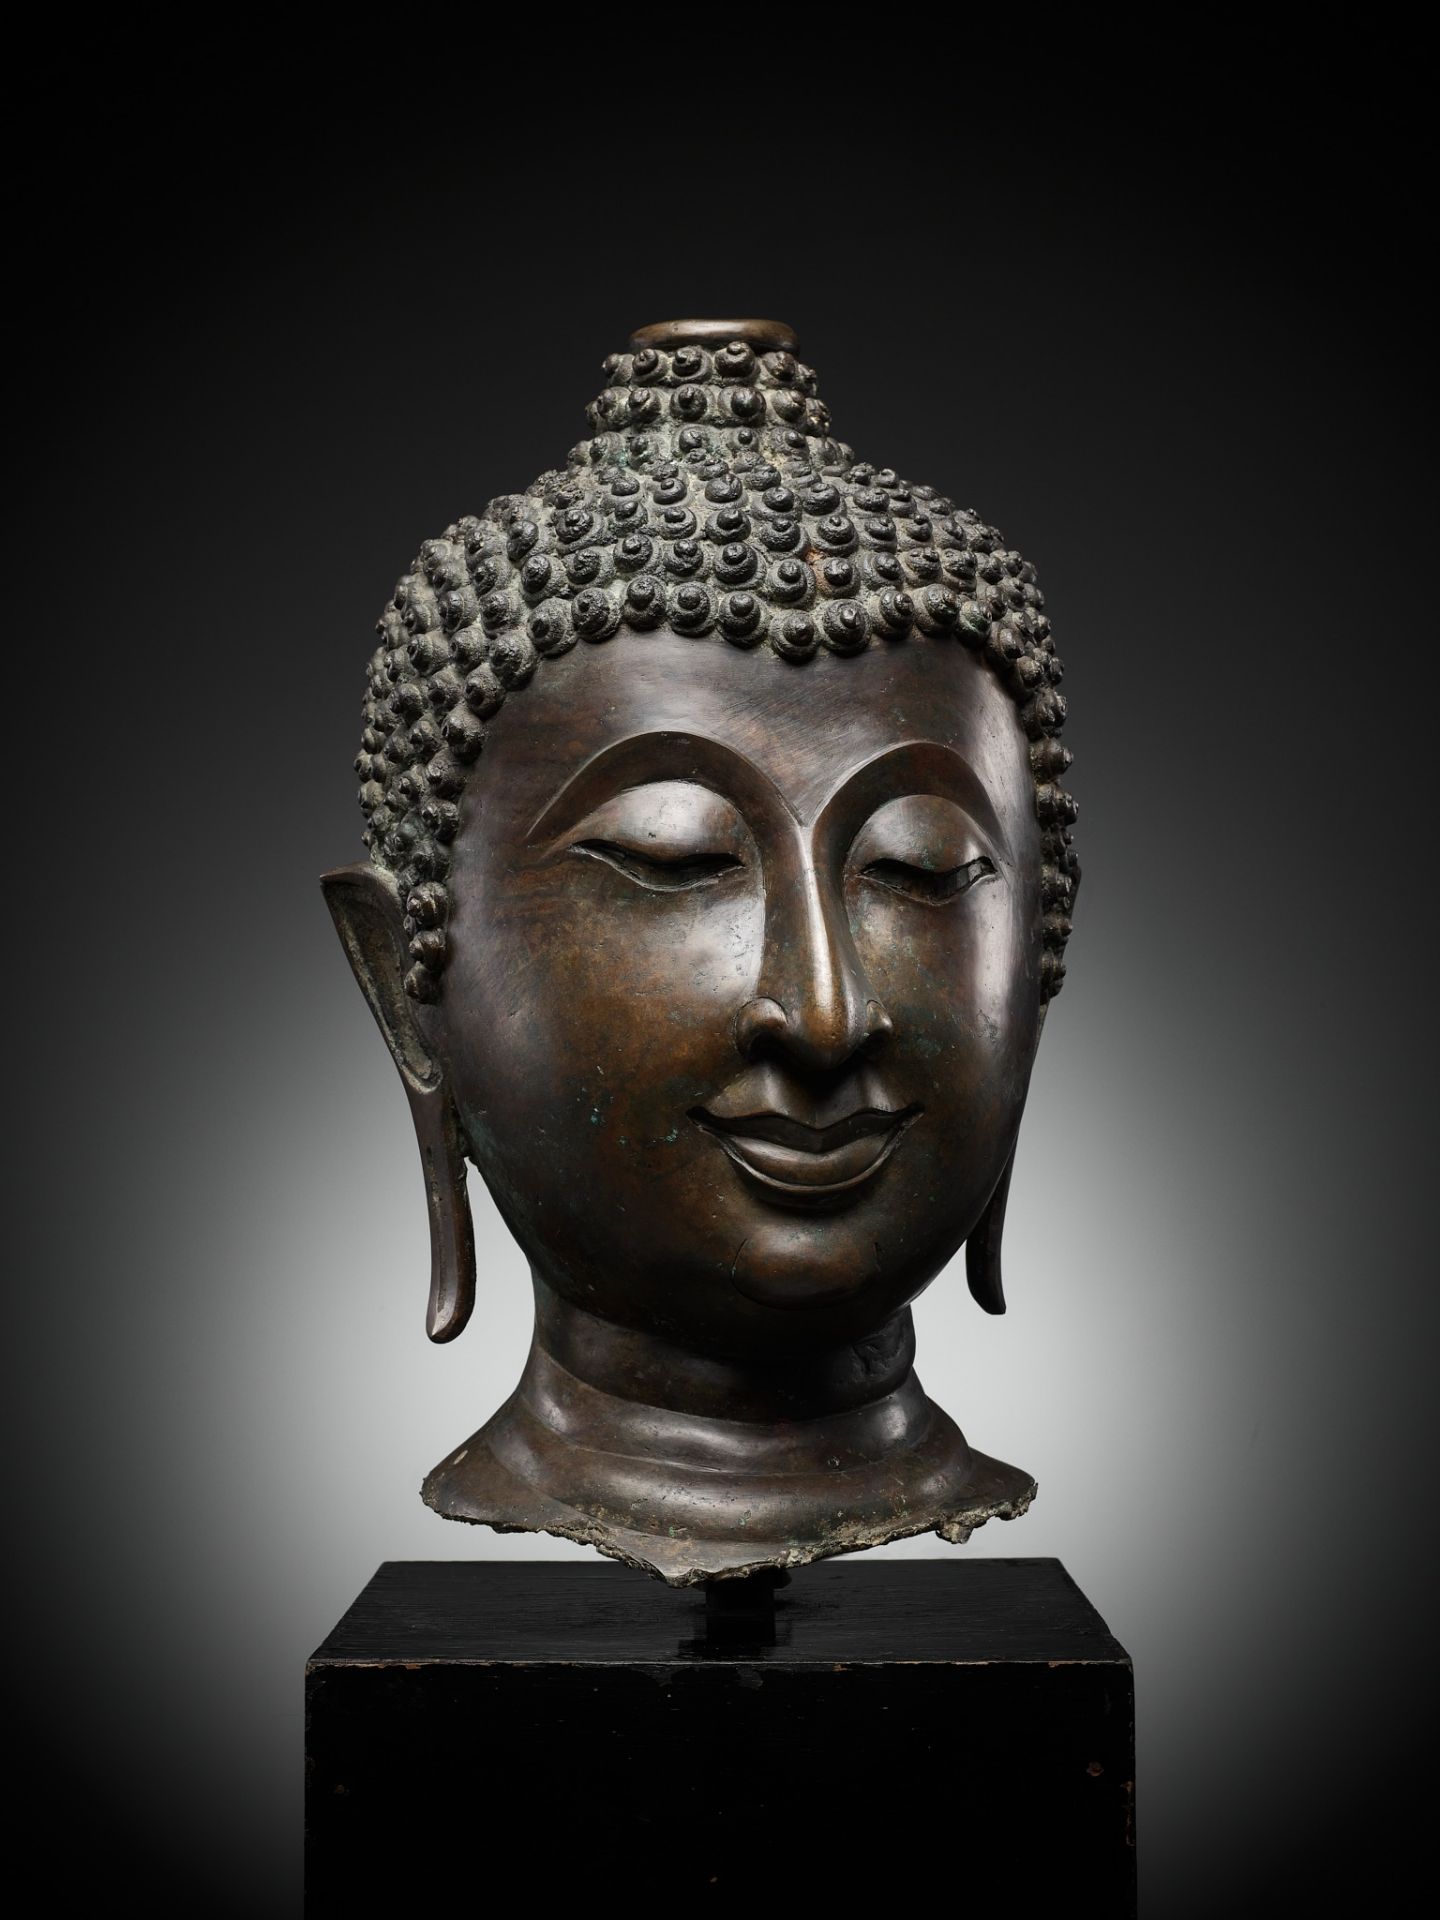 A MONUMENTAL BRONZE HEAD OF BUDDHA, LAN NA, NORTHERN THAILAND, 14TH-15th CENTURY - Image 6 of 16